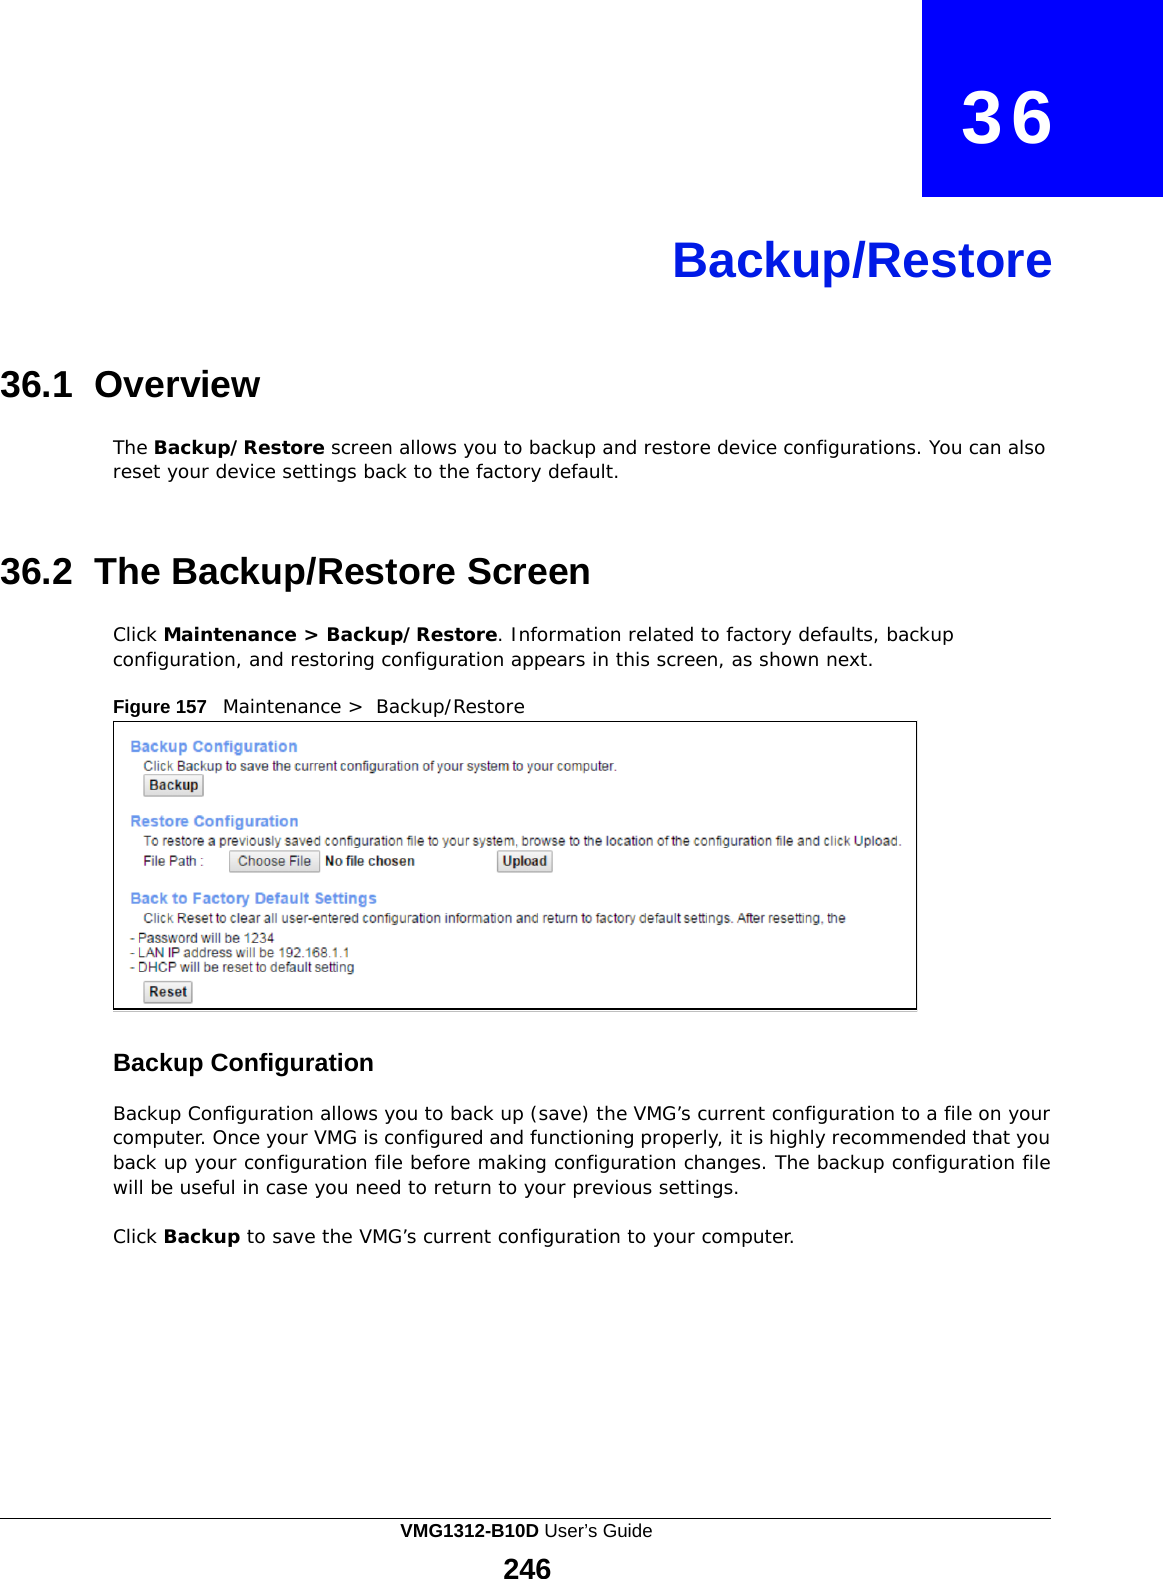    36     Backup/Restore     36.1 Overview  The Backup/Restore screen allows you to backup and restore device configurations. You can also reset your device settings back to the factory default.    36.2 The Backup/Restore Screen  Click Maintenance &gt; Backup/Restore. Information related to factory defaults, backup configuration, and restoring configuration appears in this screen, as shown next.  Figure 157   Maintenance &gt;  Backup/Restore                 Backup Configuration  Backup Configuration allows you to back up (save) the VMG’s current configuration to a file on your computer. Once your VMG is configured and functioning properly, it is highly recommended that you back up your configuration file before making configuration changes. The backup configuration file will be useful in case you need to return to your previous settings.  Click Backup to save the VMG’s current configuration to your computer. VMG1312-B10D User’s Guide 246  